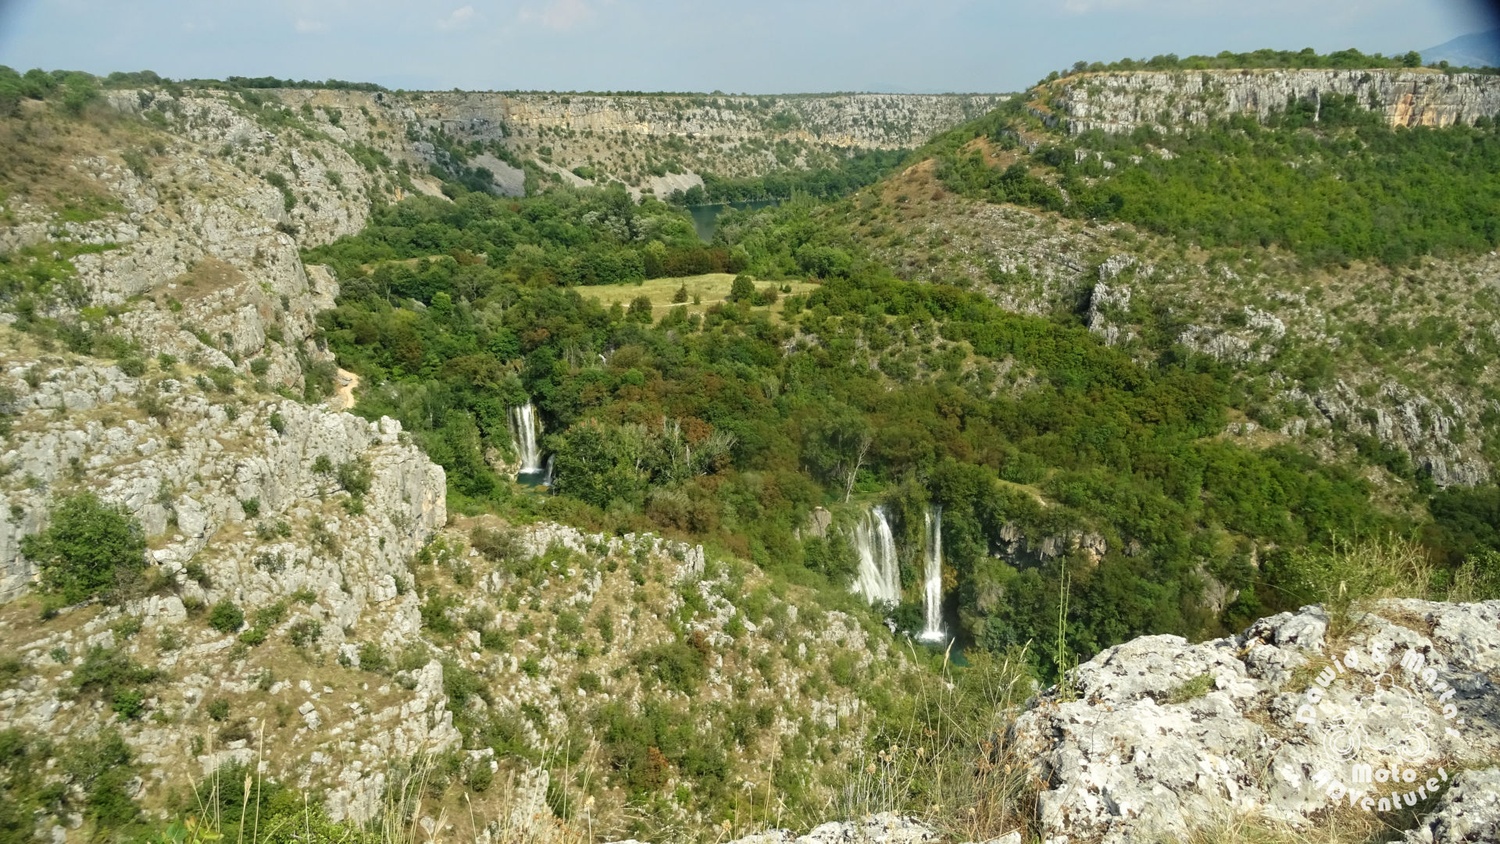 Waterfalls seen from the Krk River canyon top, inland Croatia